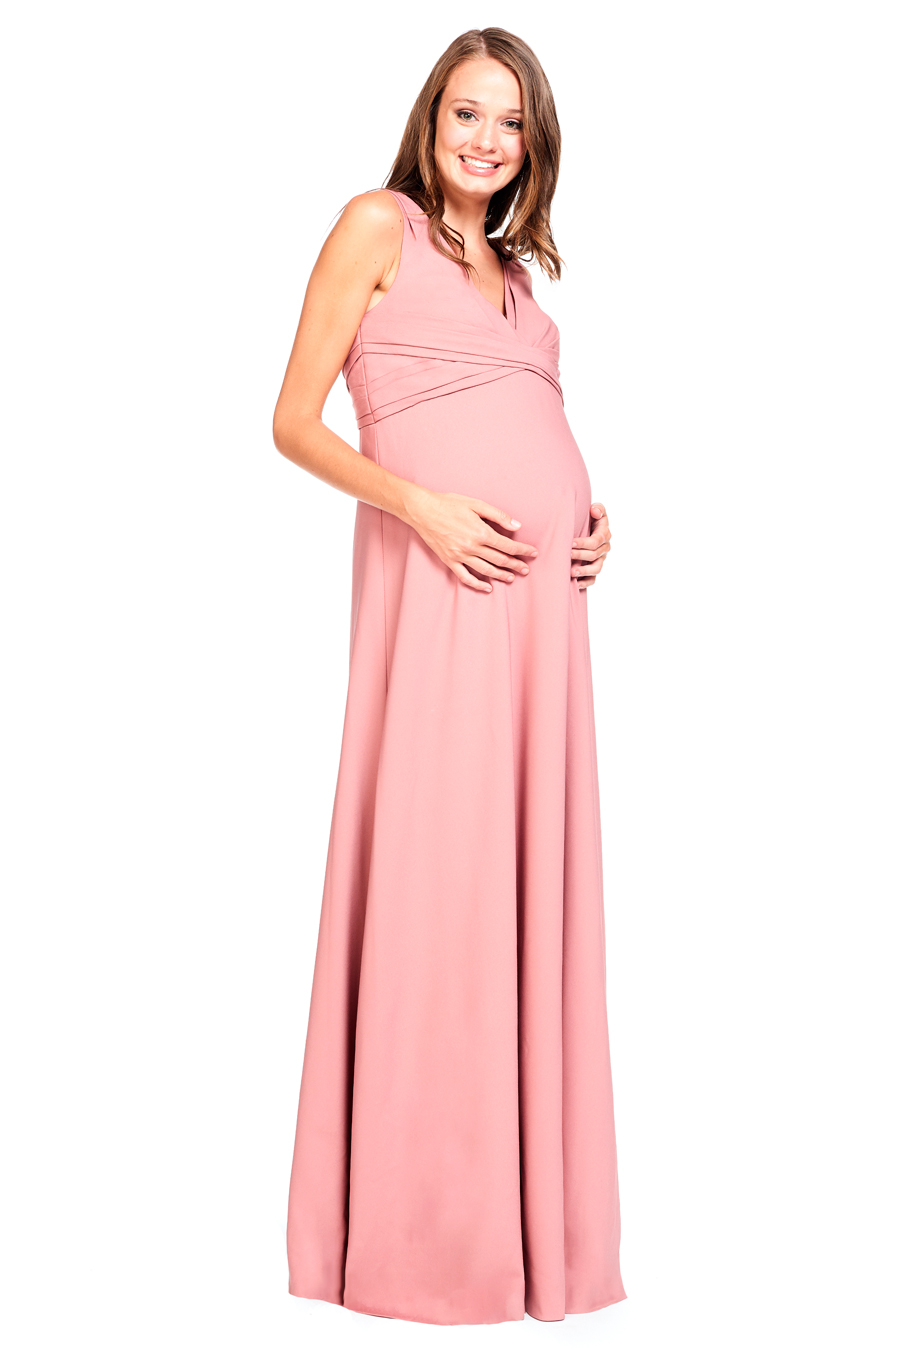 Front view maternity wide strapped pleated bodice 